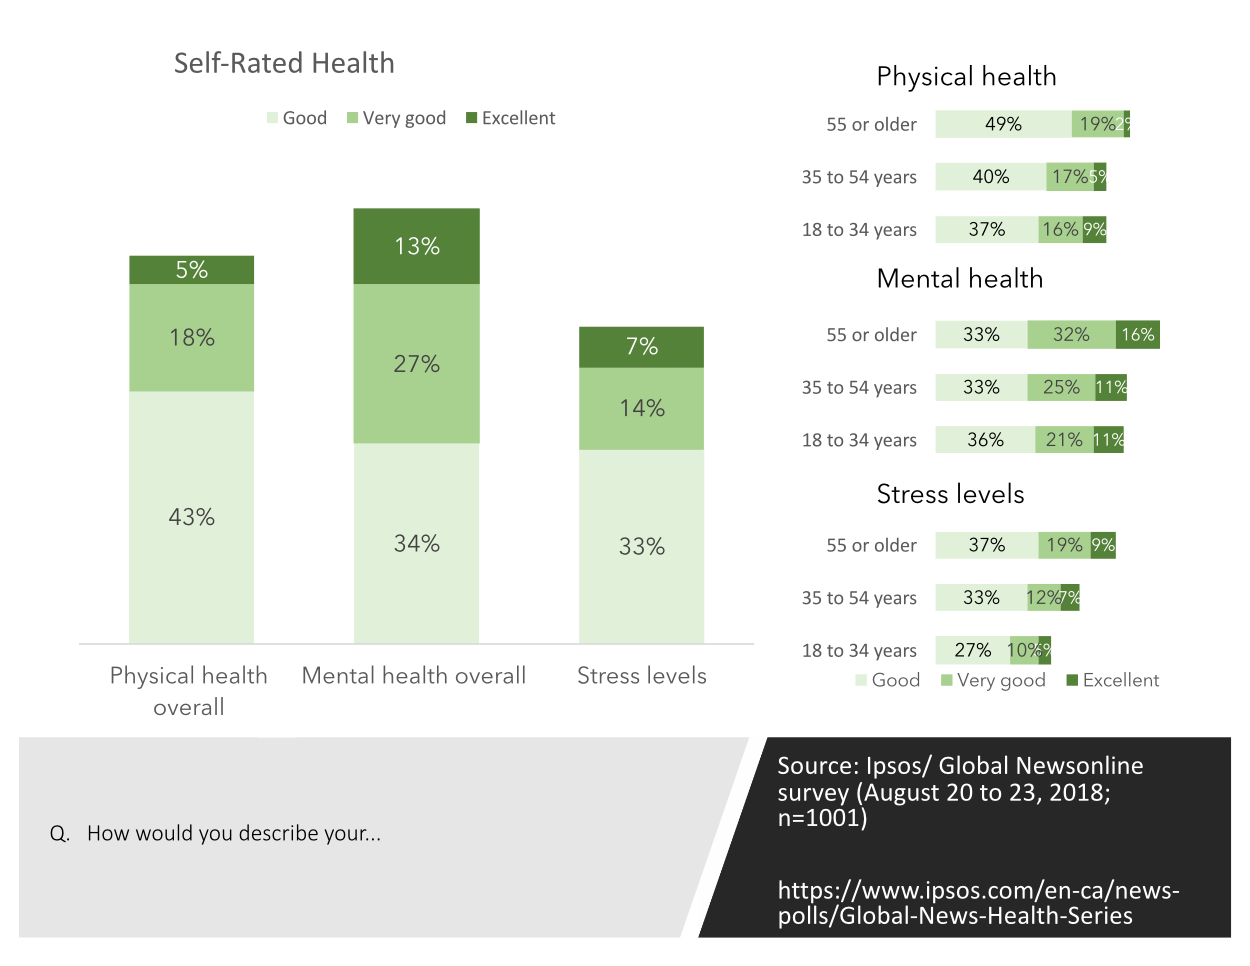 Ipsos Global News survey about physical and mental health